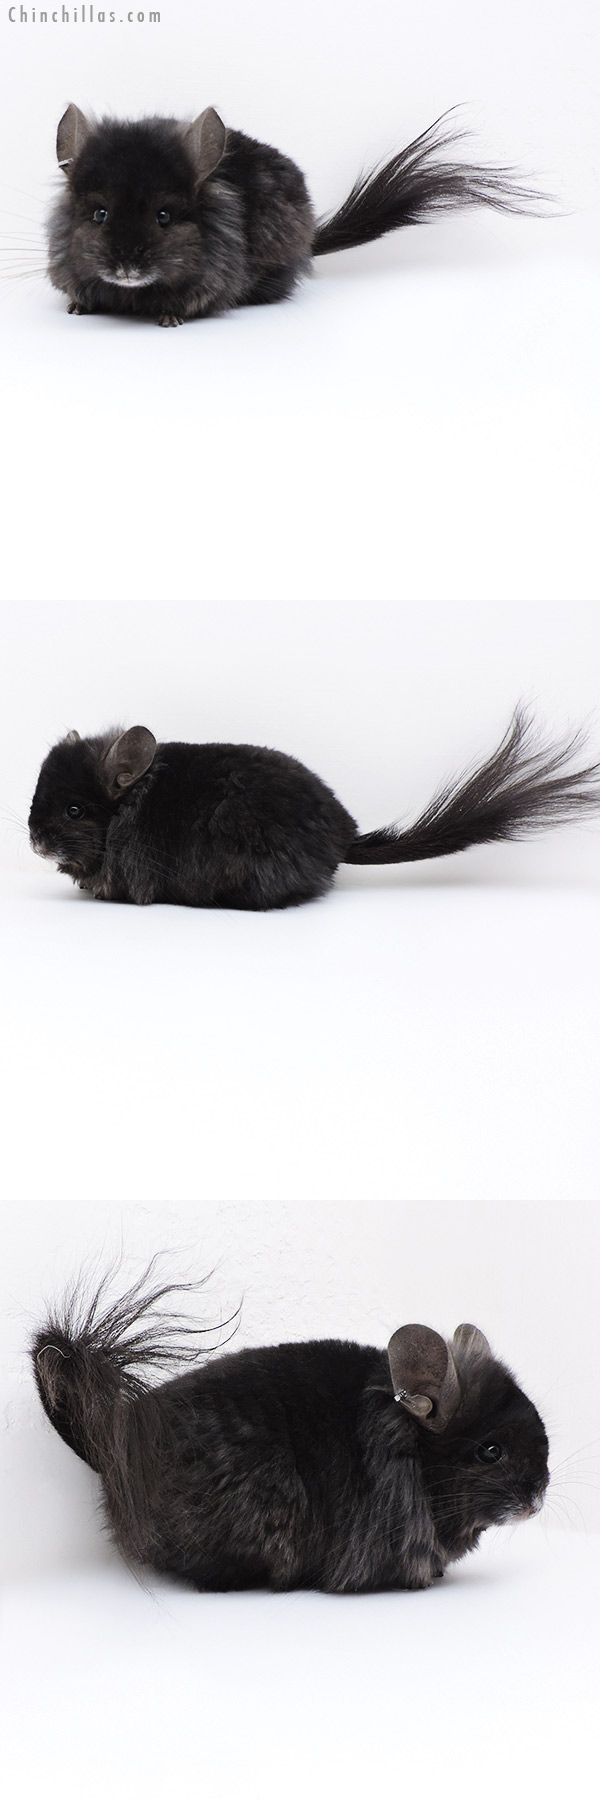 Chinchilla or related item offered for sale or export on Chinchillas.com - 18005 Ebony  Royal Persian Angora ( Locken Carrier ) Female Chinchilla with Lion Mane